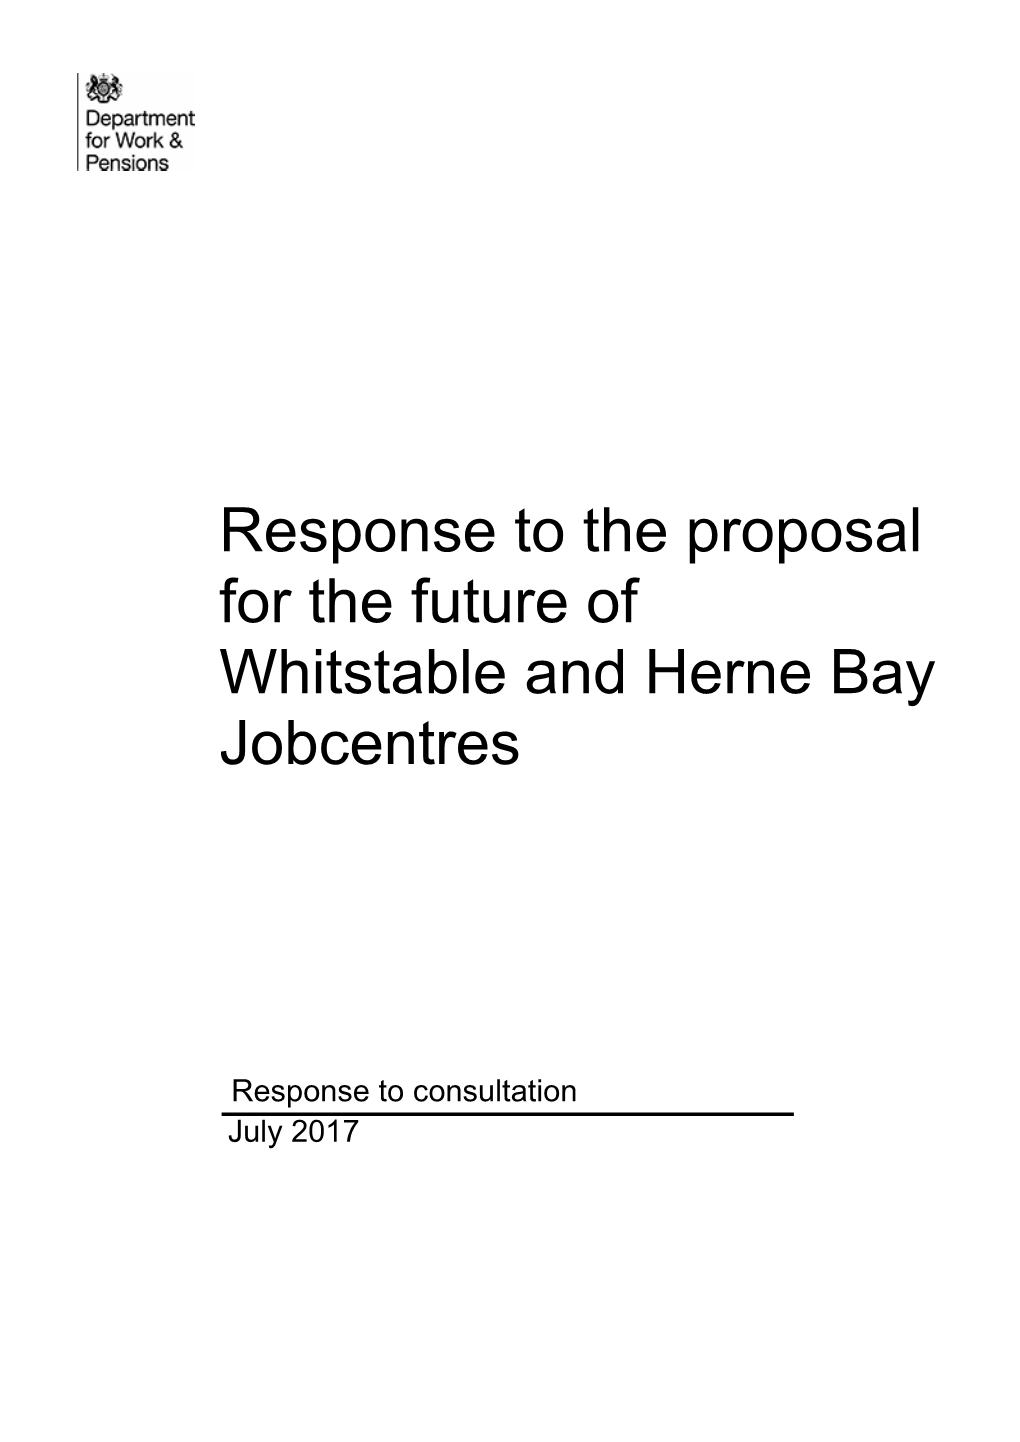 Response to the Proposal for the Future of Whitstable and Herne Bay Jobcentres